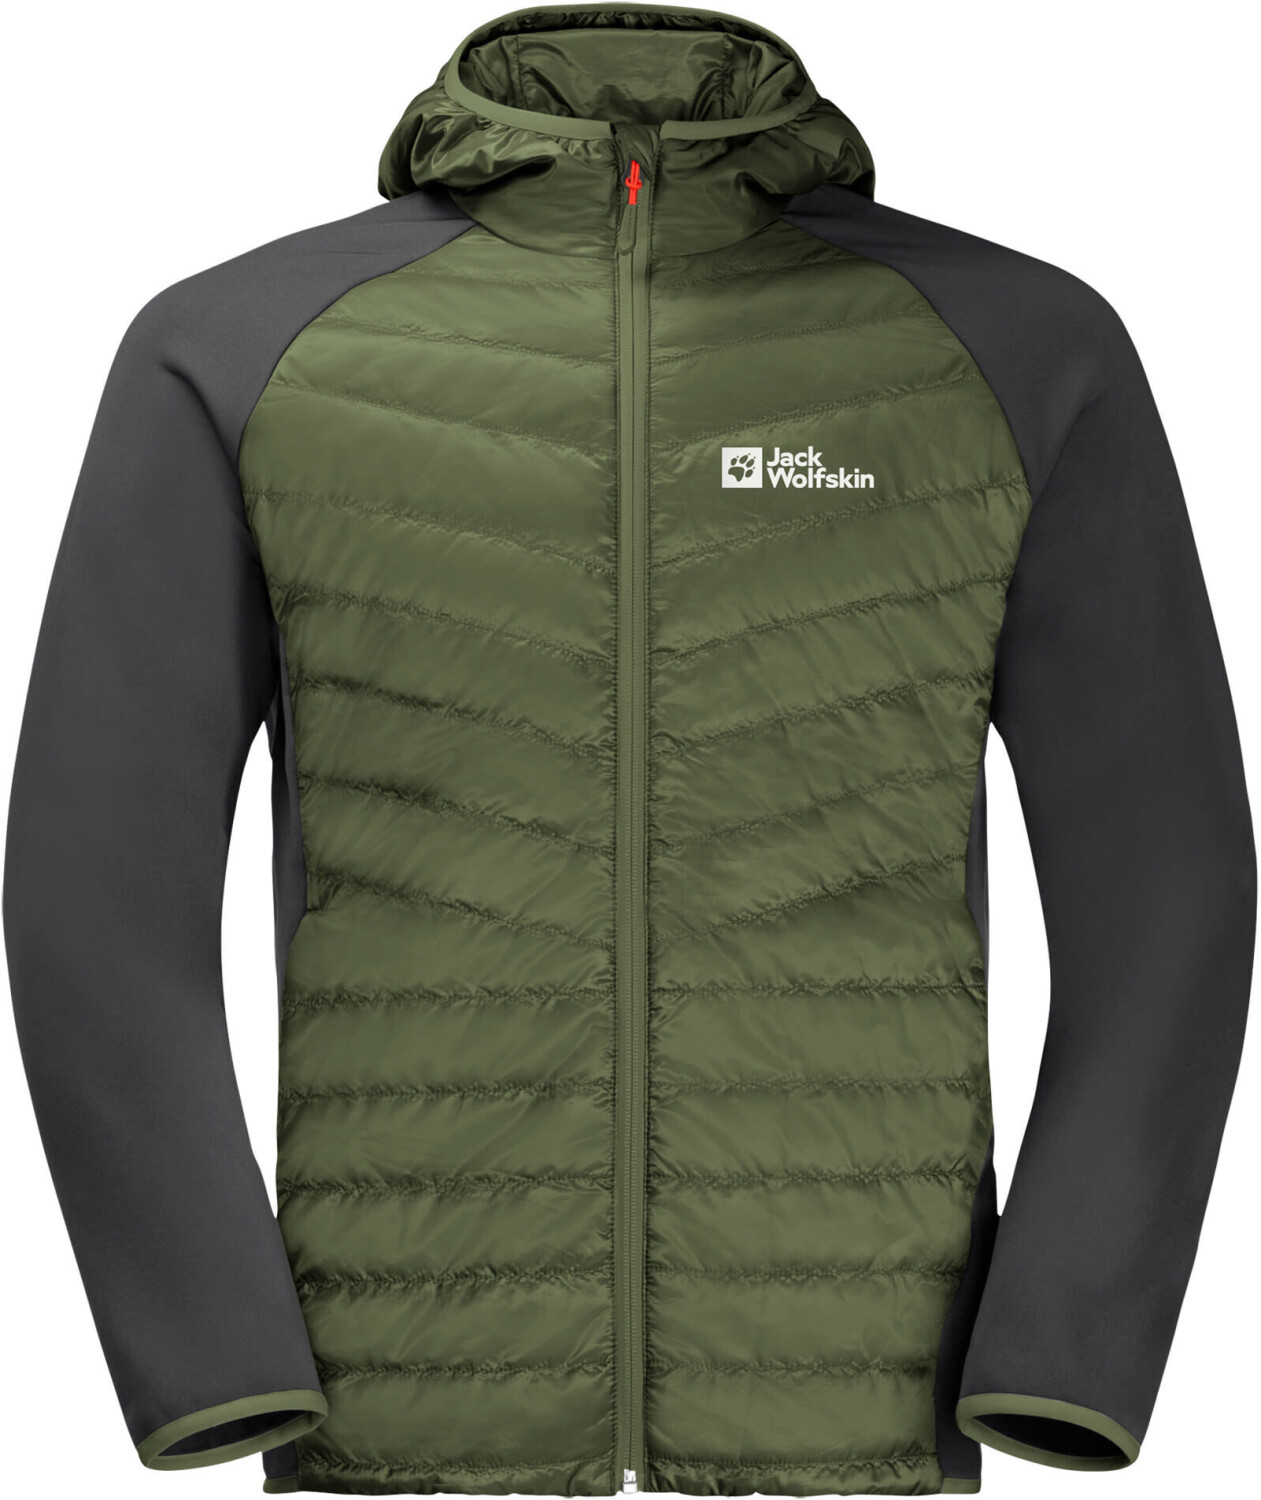 Buy Jack Wolfskin Routeburn from (Today) M £60.00 Pro Best Deals – on Hybrid